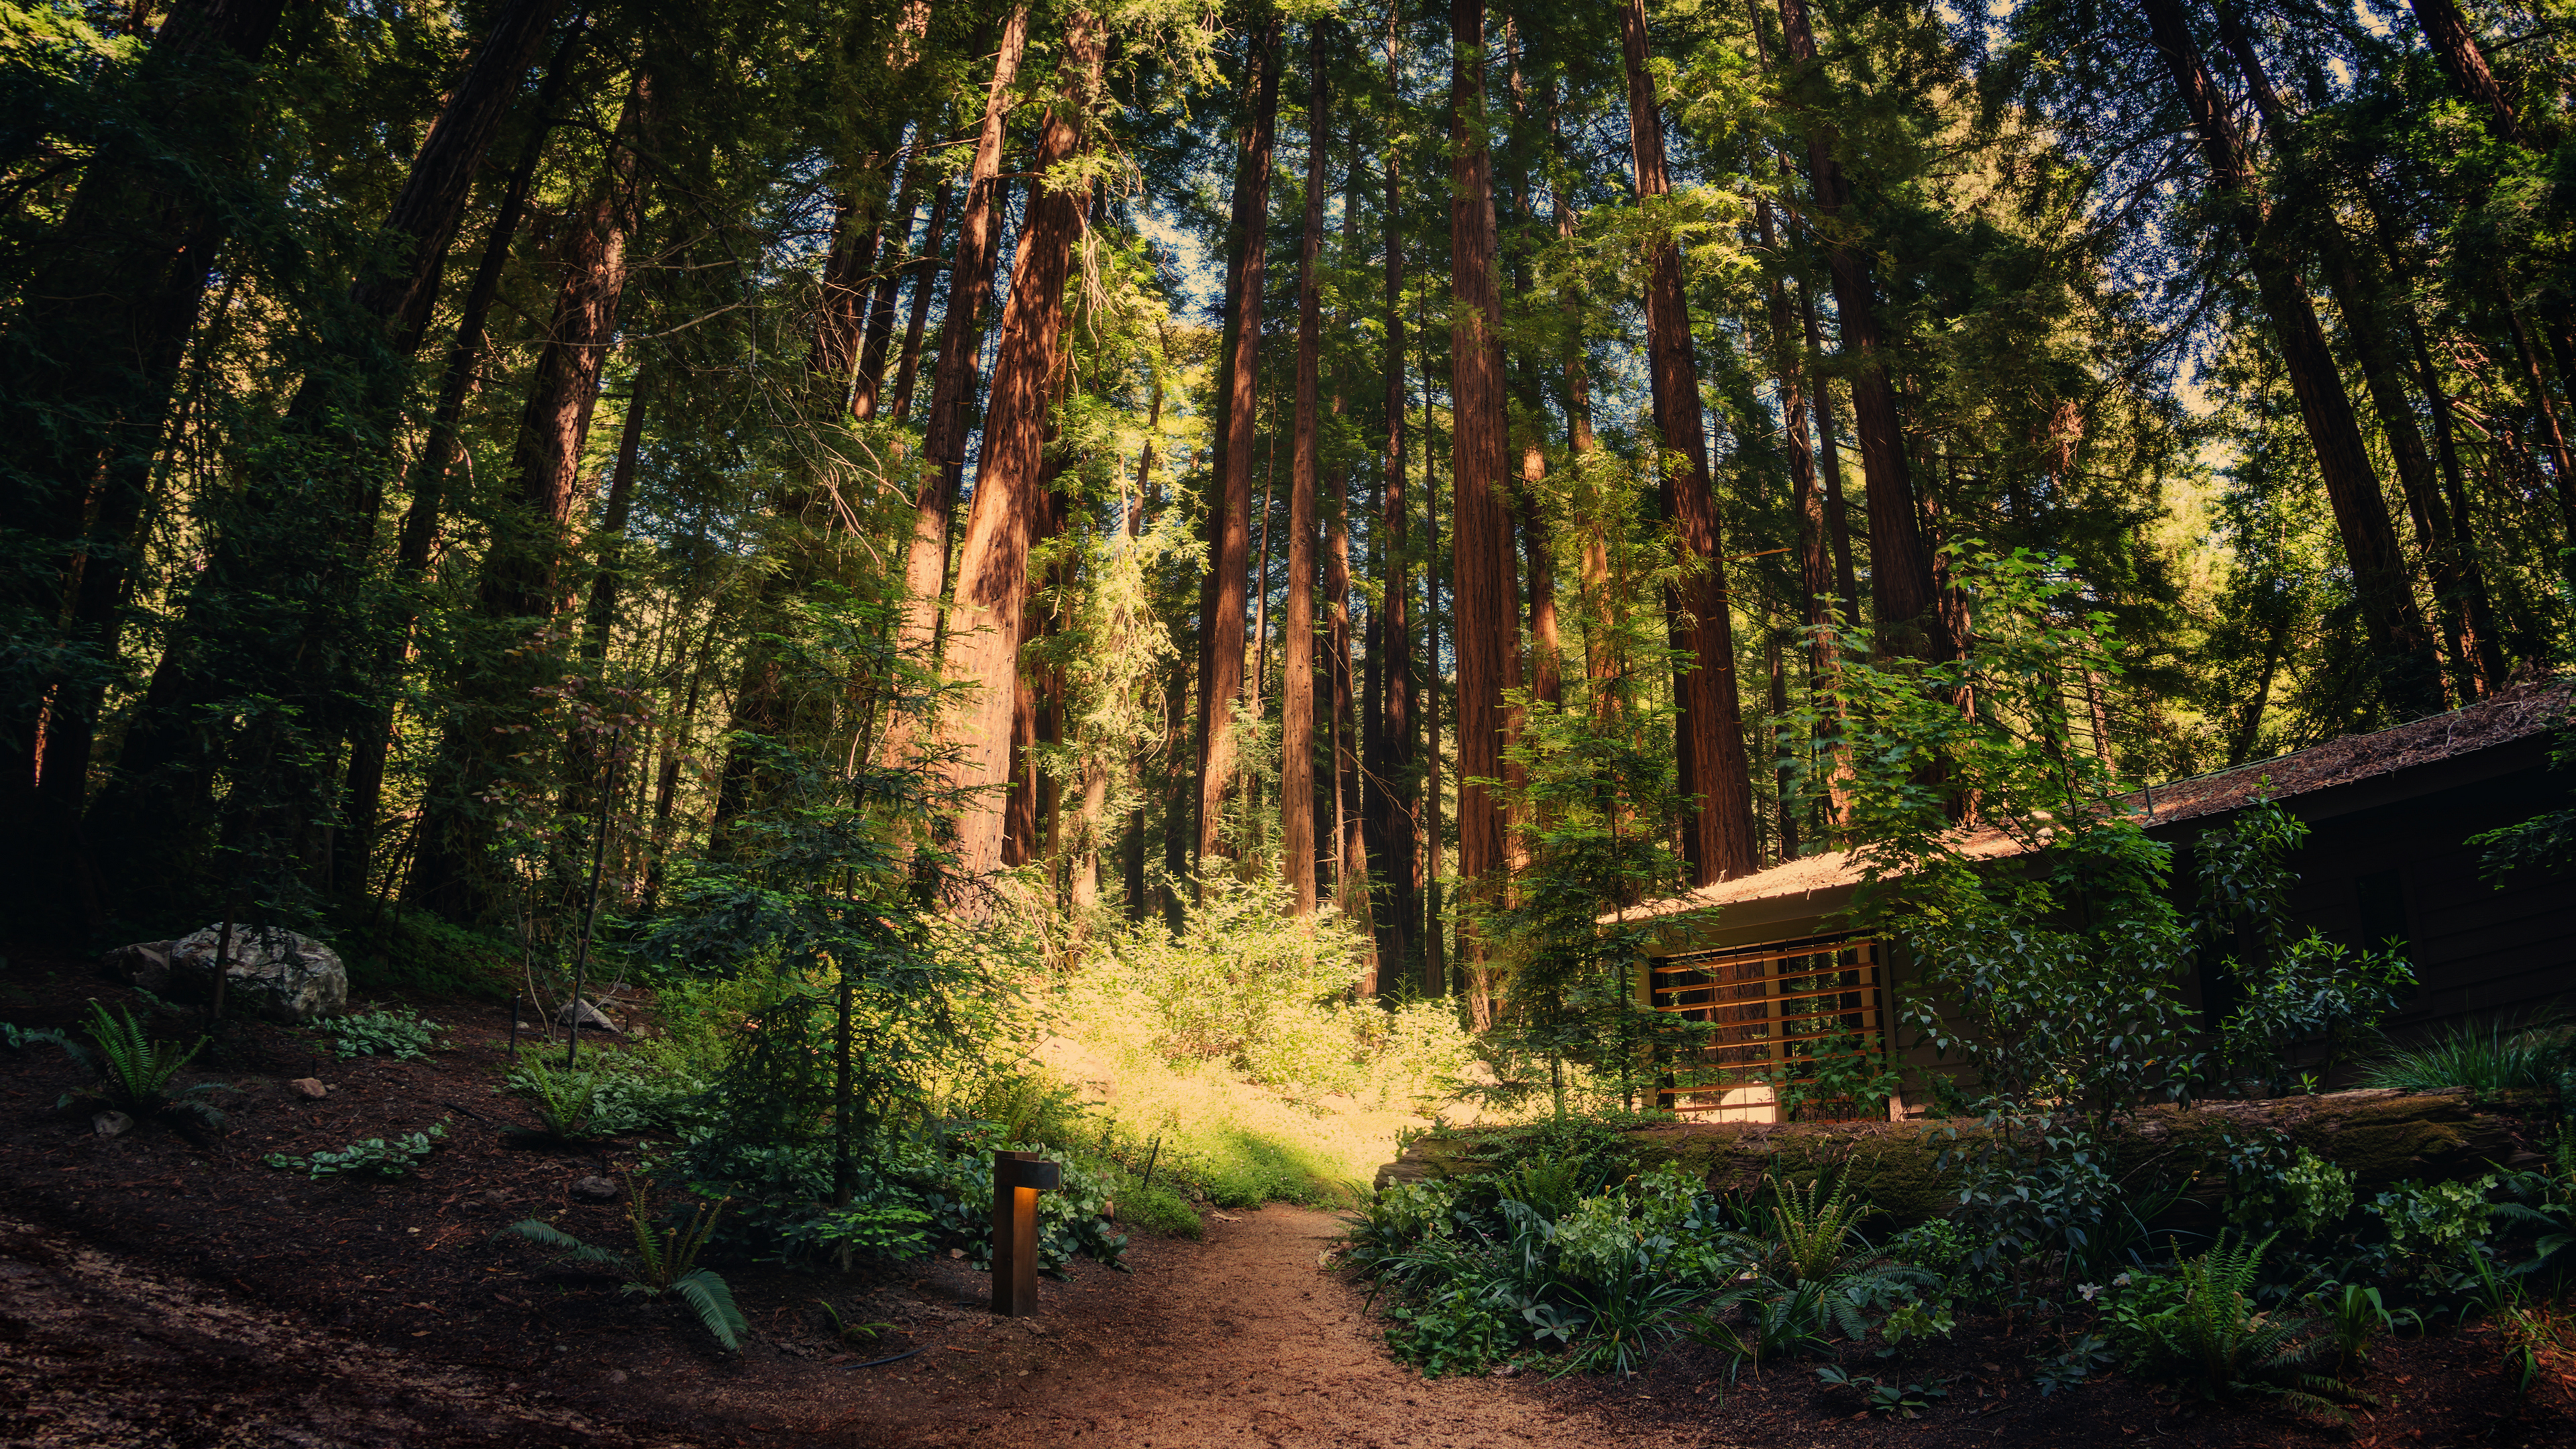 General 3840x2160 4K photography California trees nature path plants forest